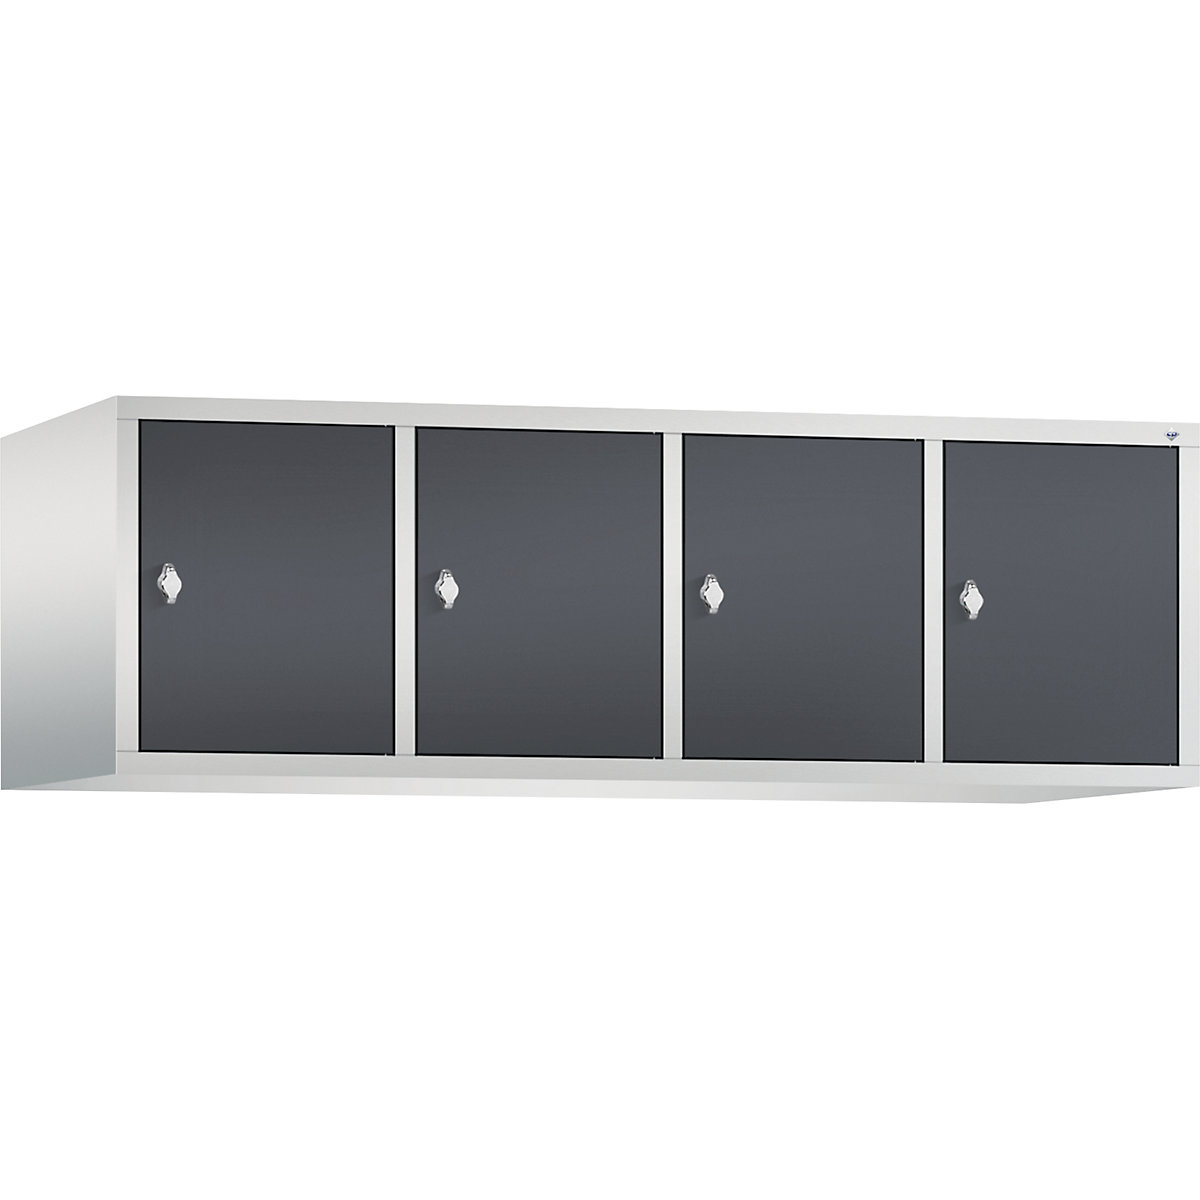 CLASSIC add-on cupboard – C+P, 4 compartments, compartment width 400 mm, light grey / black grey-13